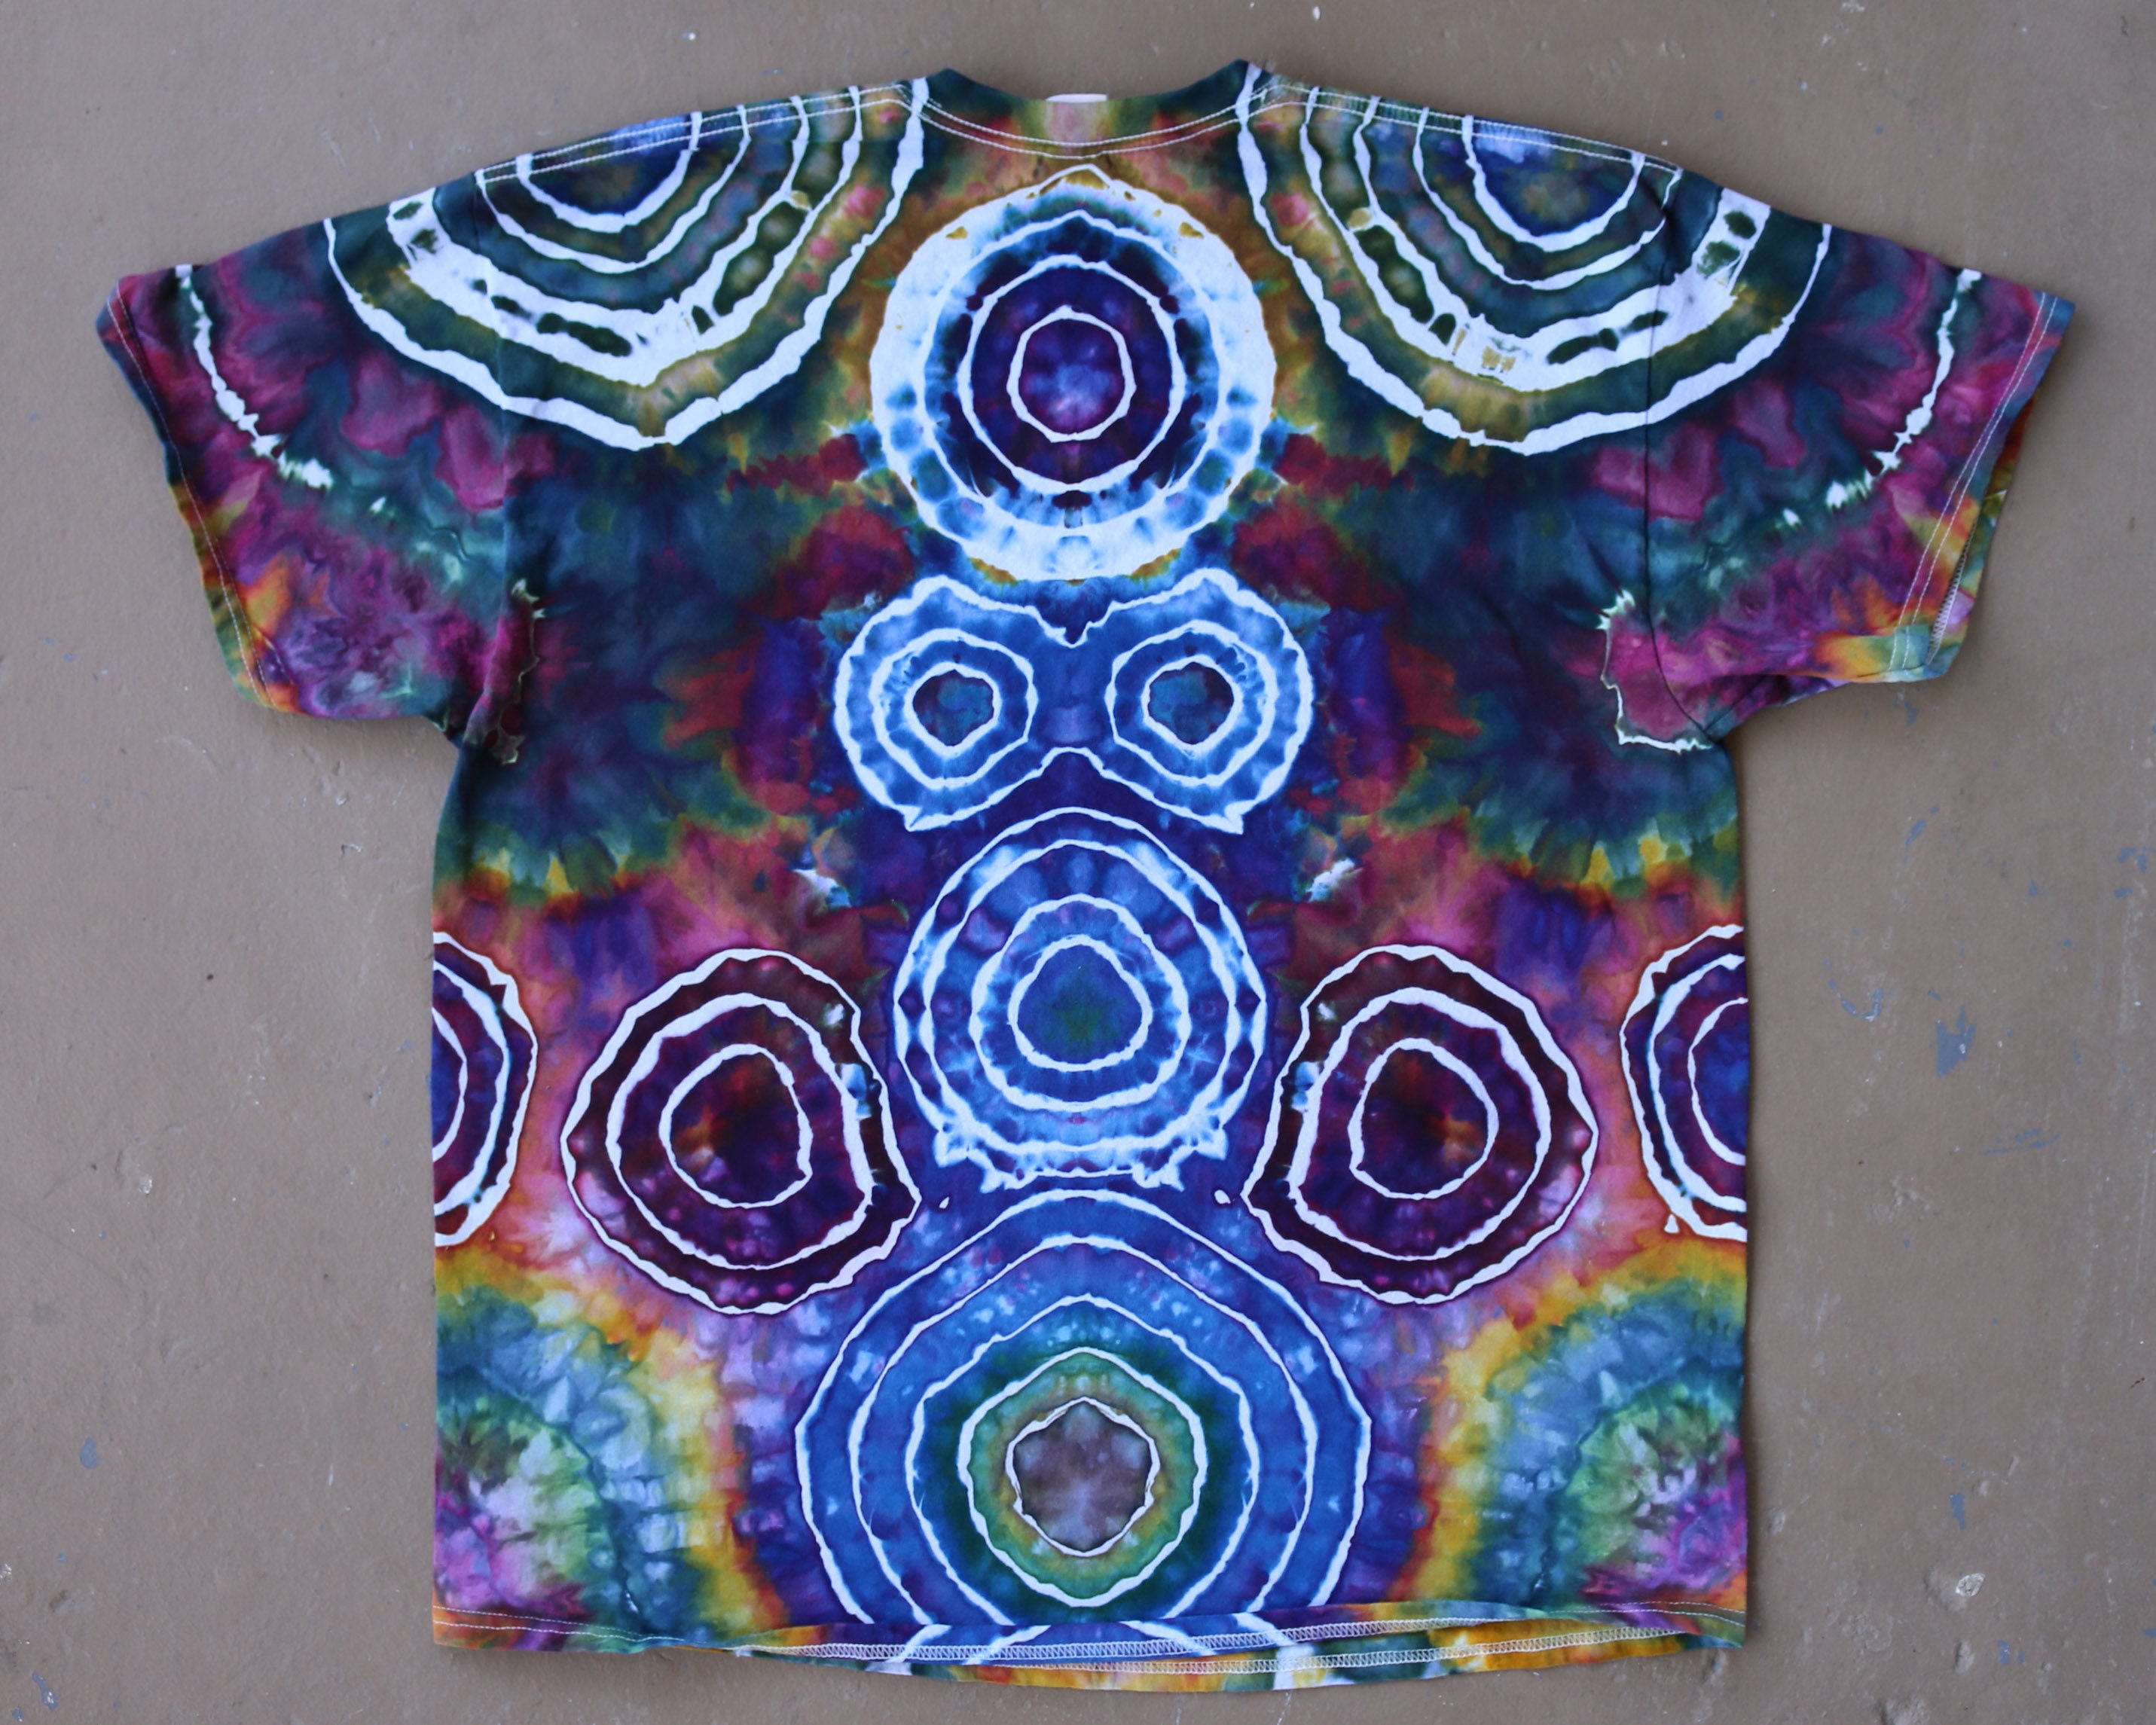  Hisayhe Trippy T-Shirt 3D Printed Psychedelic Tie Dye